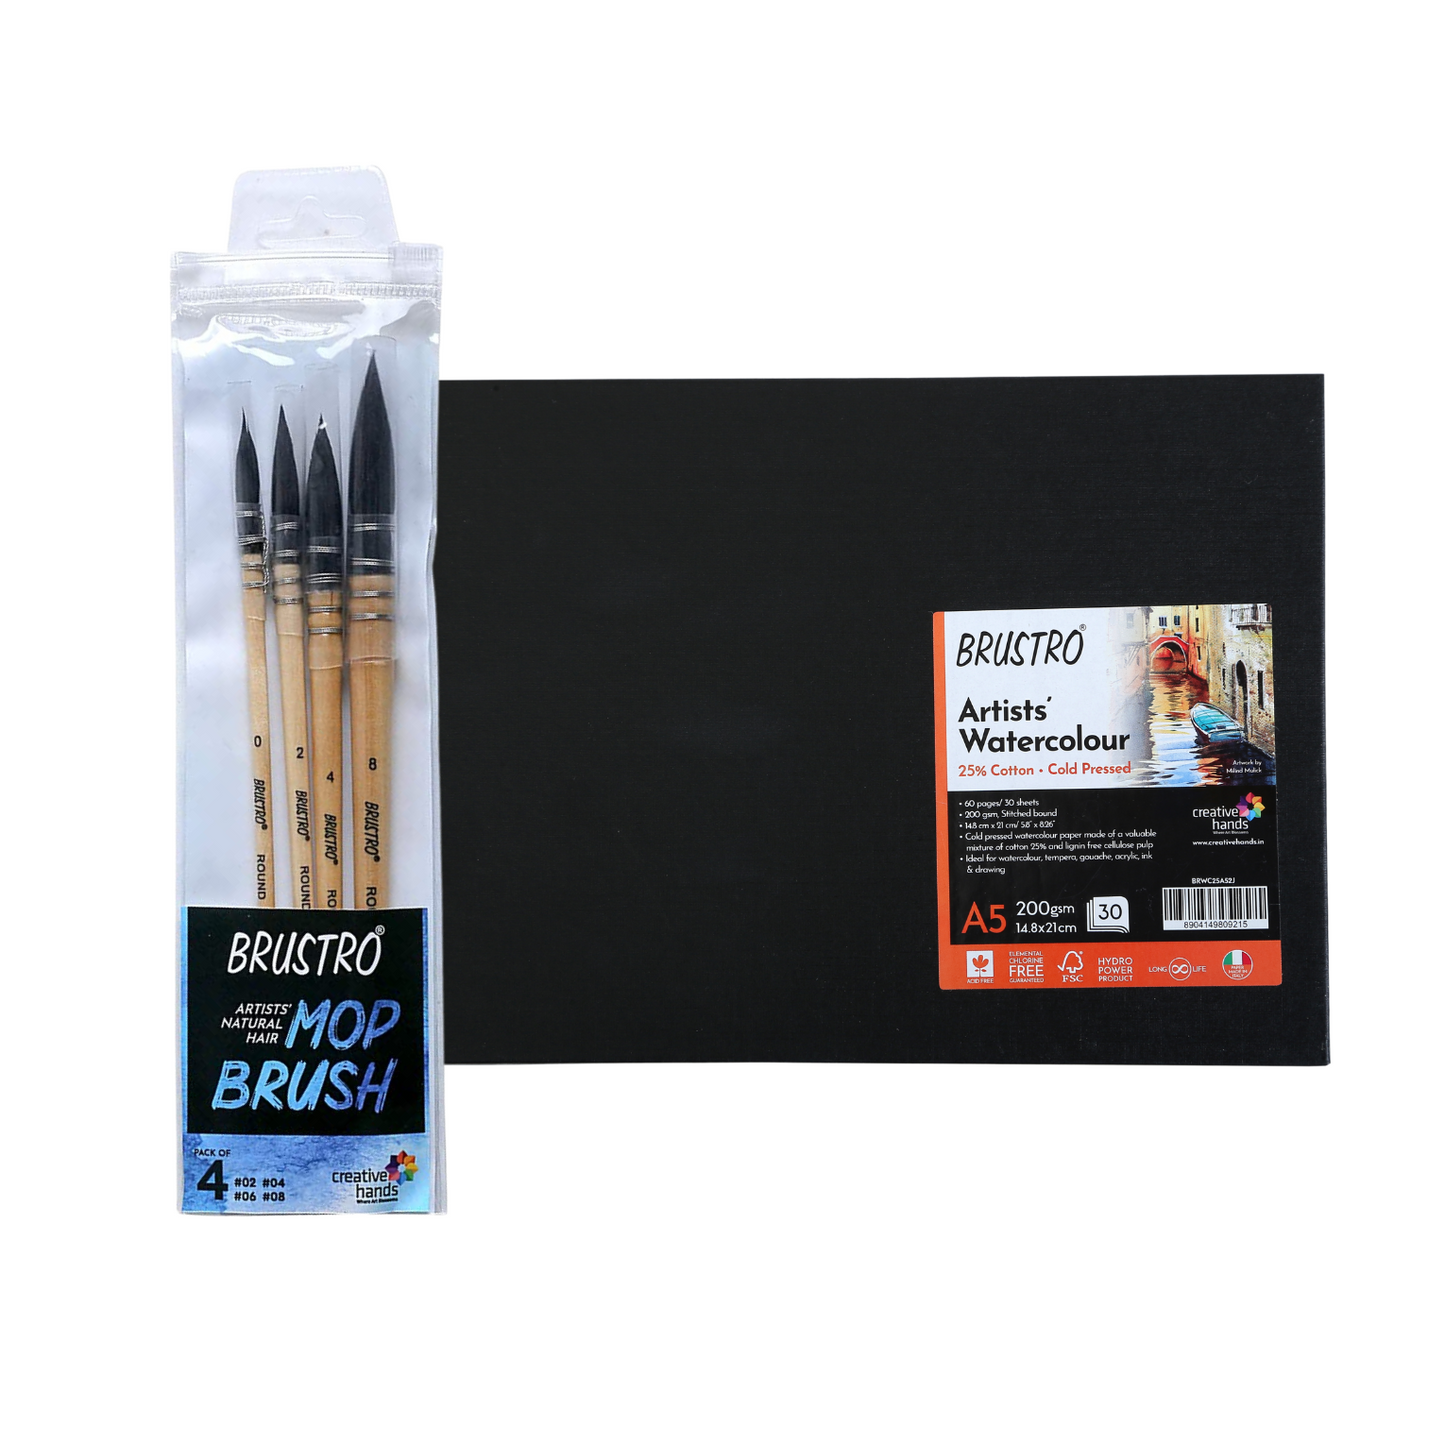 BRUSTRO Artists Natural Hair MOP Brush Set of 4 (0, 2, 4, 8) with A5 Stitched Bound 200GSM Watercolour Journal